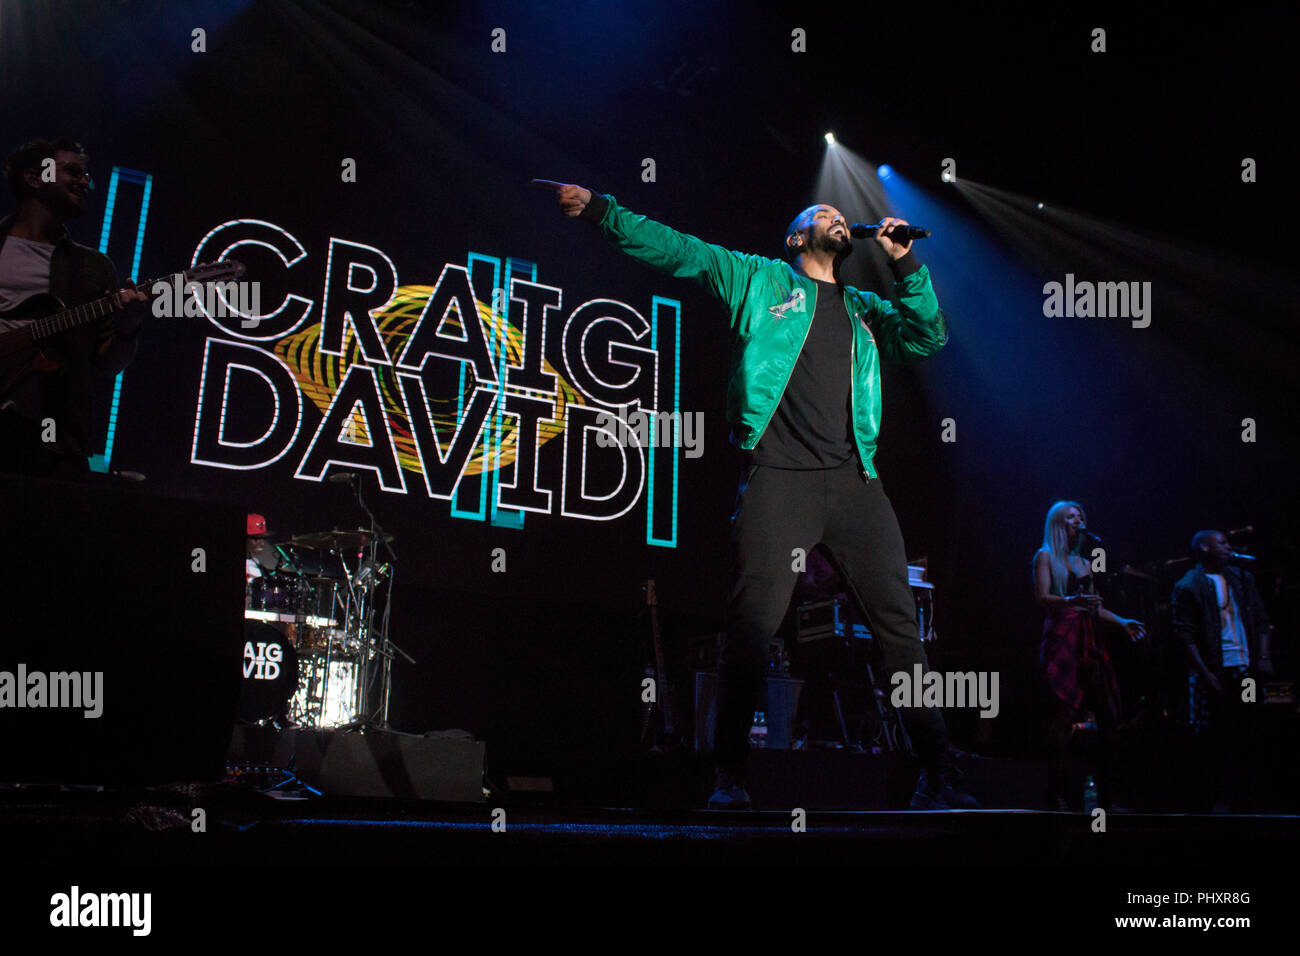 Northampton Cricket Ground, UK. 1st Sept 2018. Craig David performing on stage at Northampton Cricket Ground on 1st September 2018 with his logo on screen behind him. Wearing black trousers, shirt and green designer bomber jacket Credit: Kev Wise Images/Alamy Live News Stock Photo